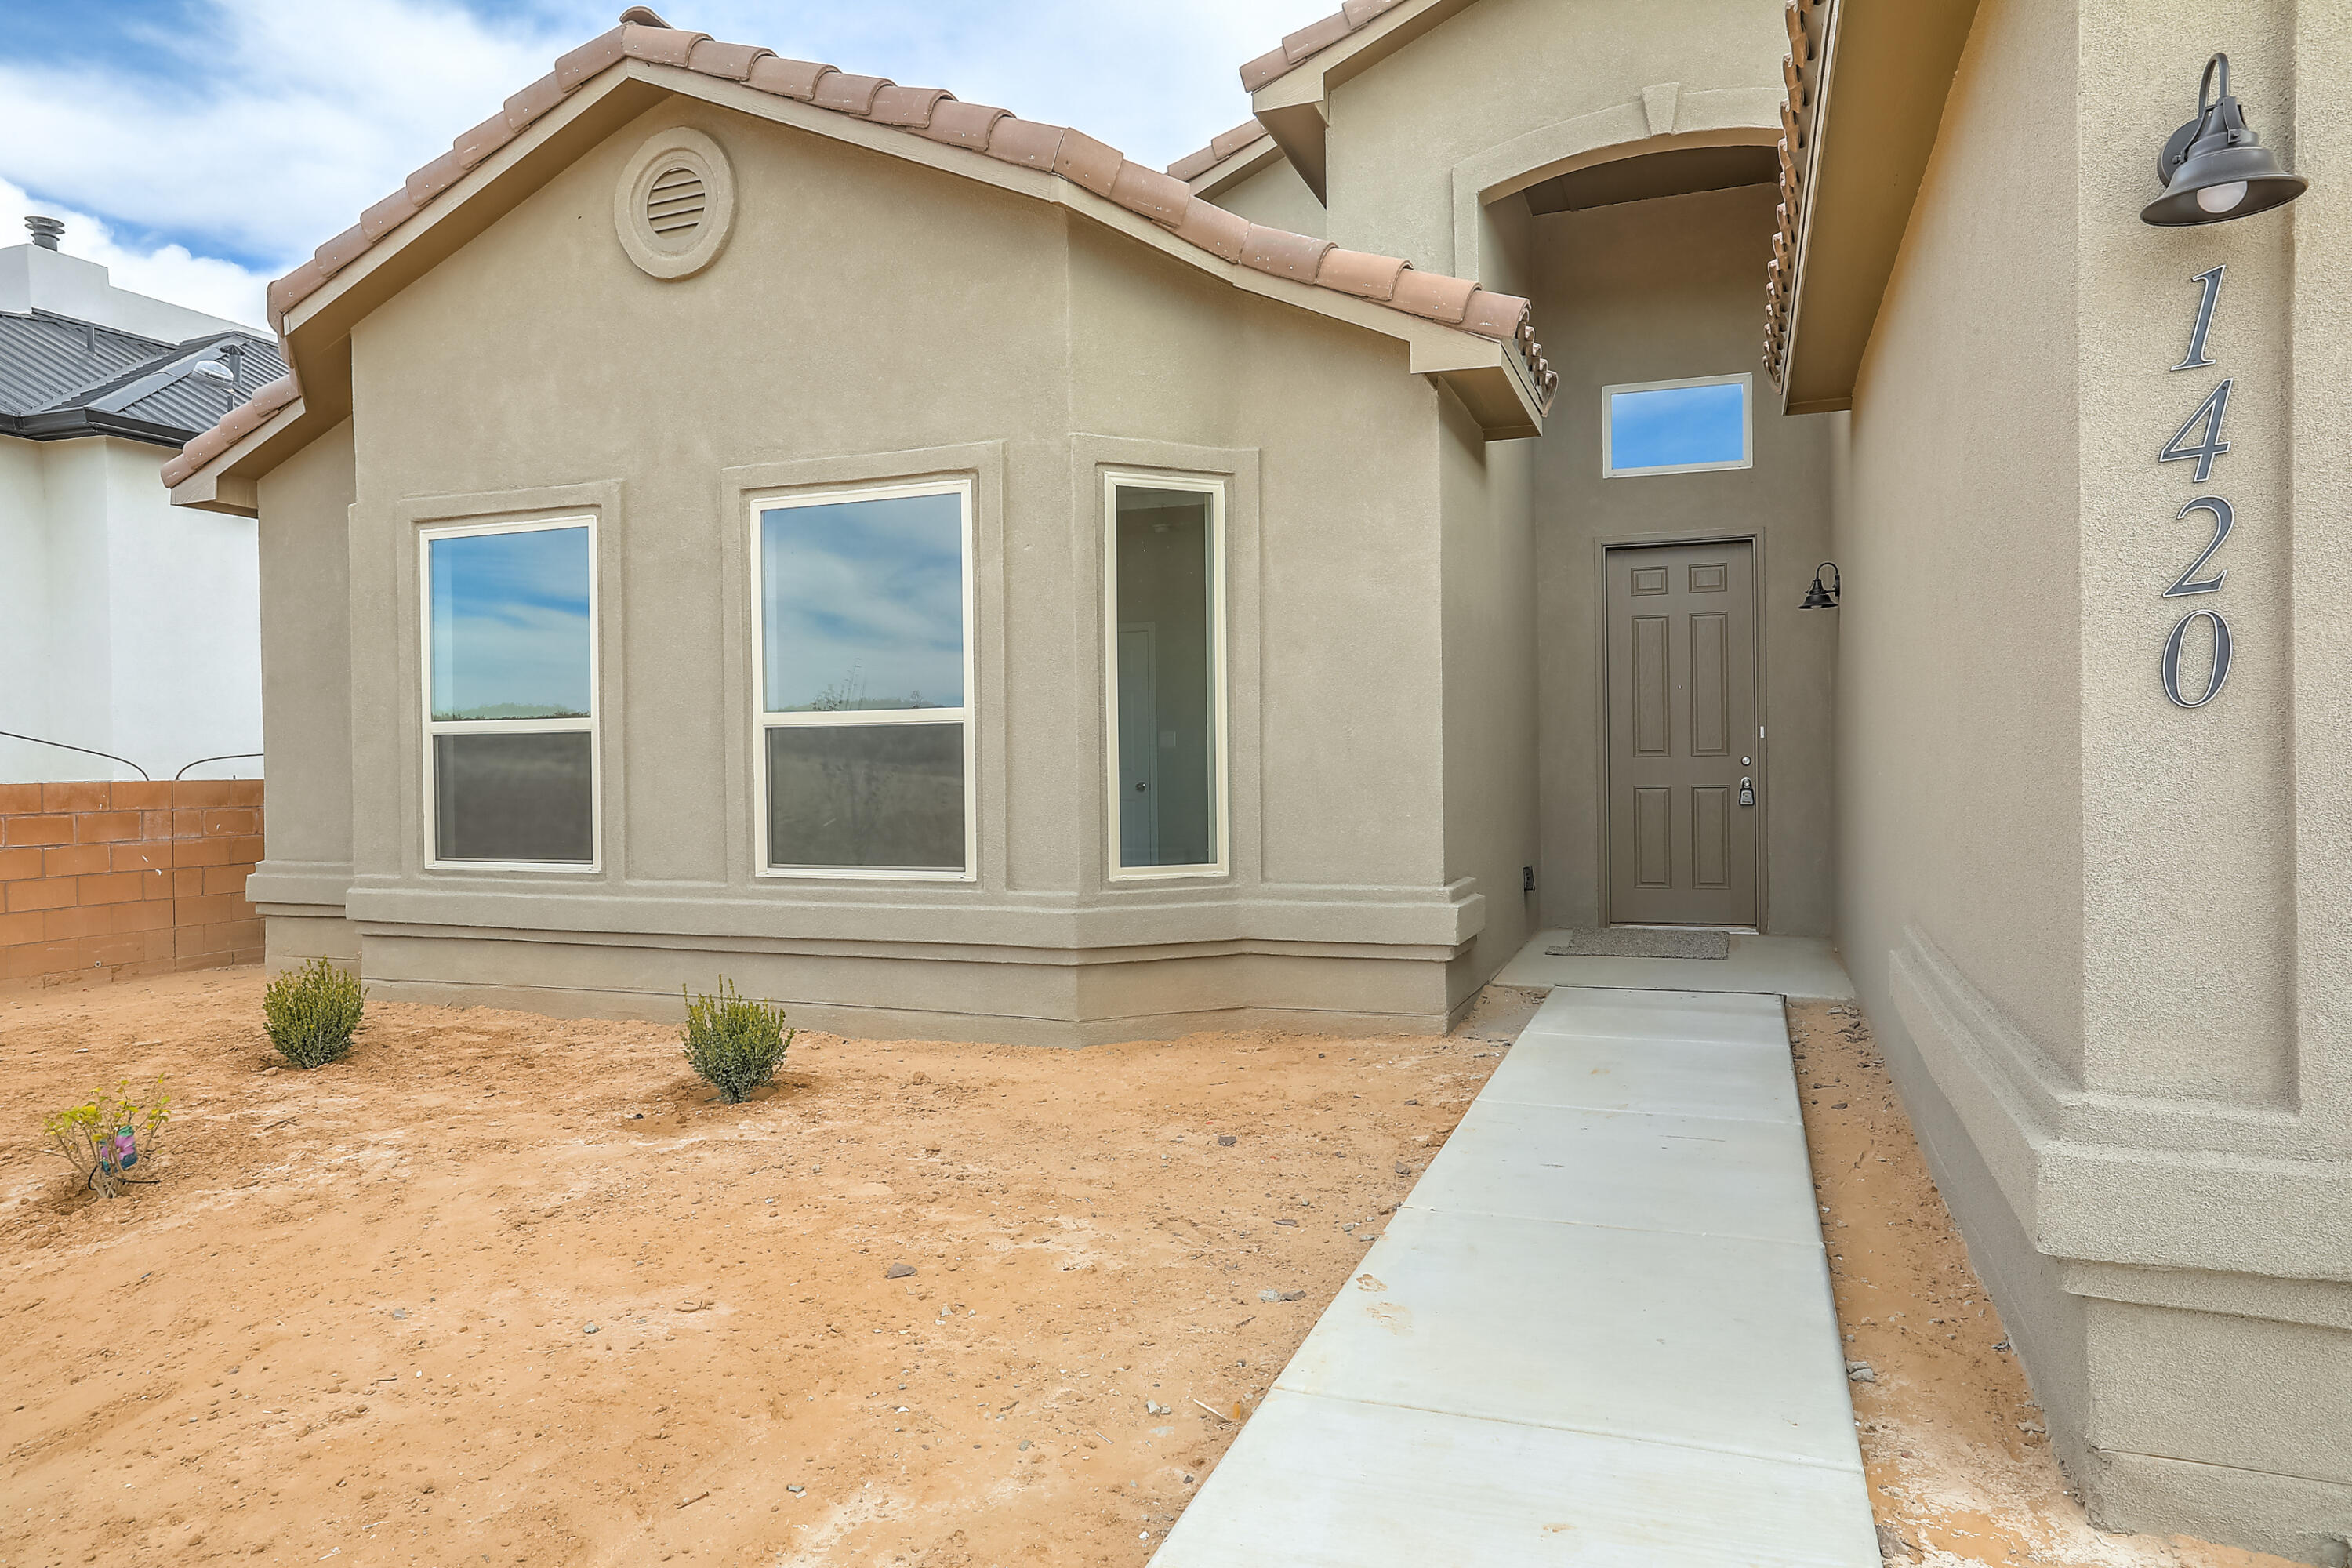 Newly Completed New Construction.  This beautiful home sits on top of the subdivision with epic views awaiting just outside your back window.  The floor plan features a large island that opens up into the living room and creates a space that is wonderful for entertaining.  Dazzle your guests with the views of the City of Albuquerque and the sunset dancing on the mountains below you.  Come for the views, stay for the home!  ** Builder is offering a $10K buyers incentive to be used however the buyer chooses.**